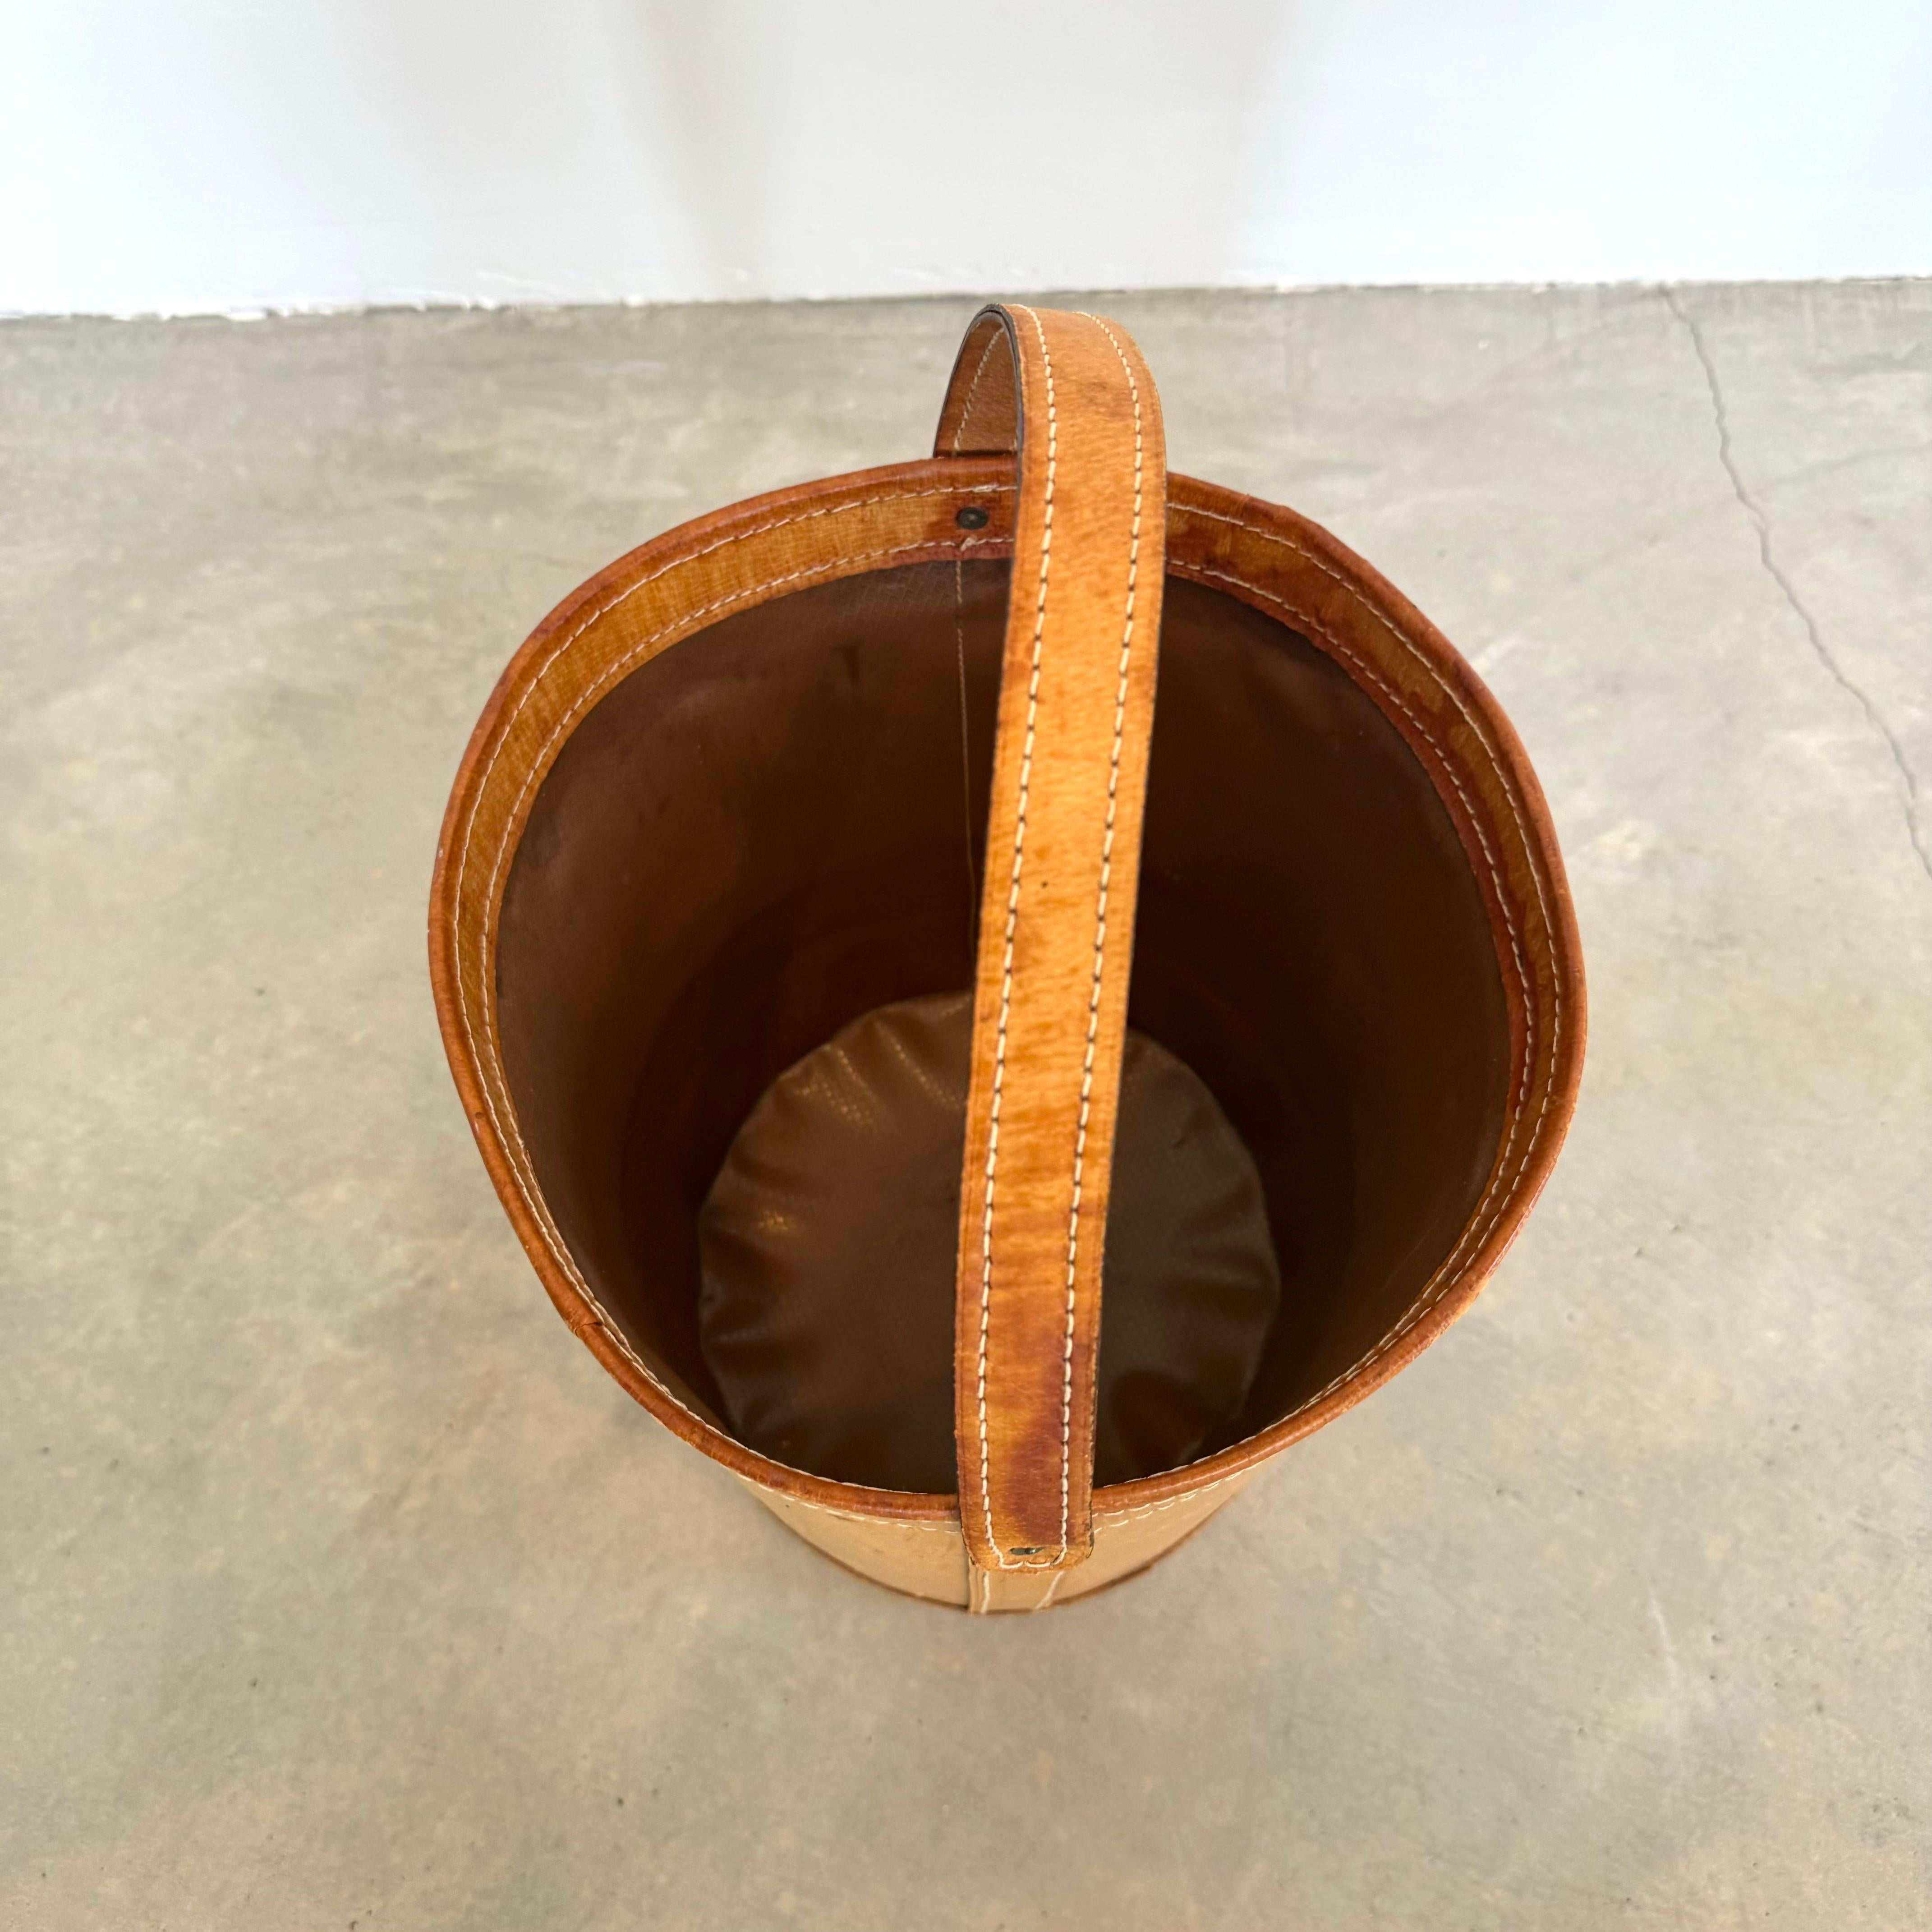 Late 20th Century Saddle Leather Waste Basket, 1970s France For Sale